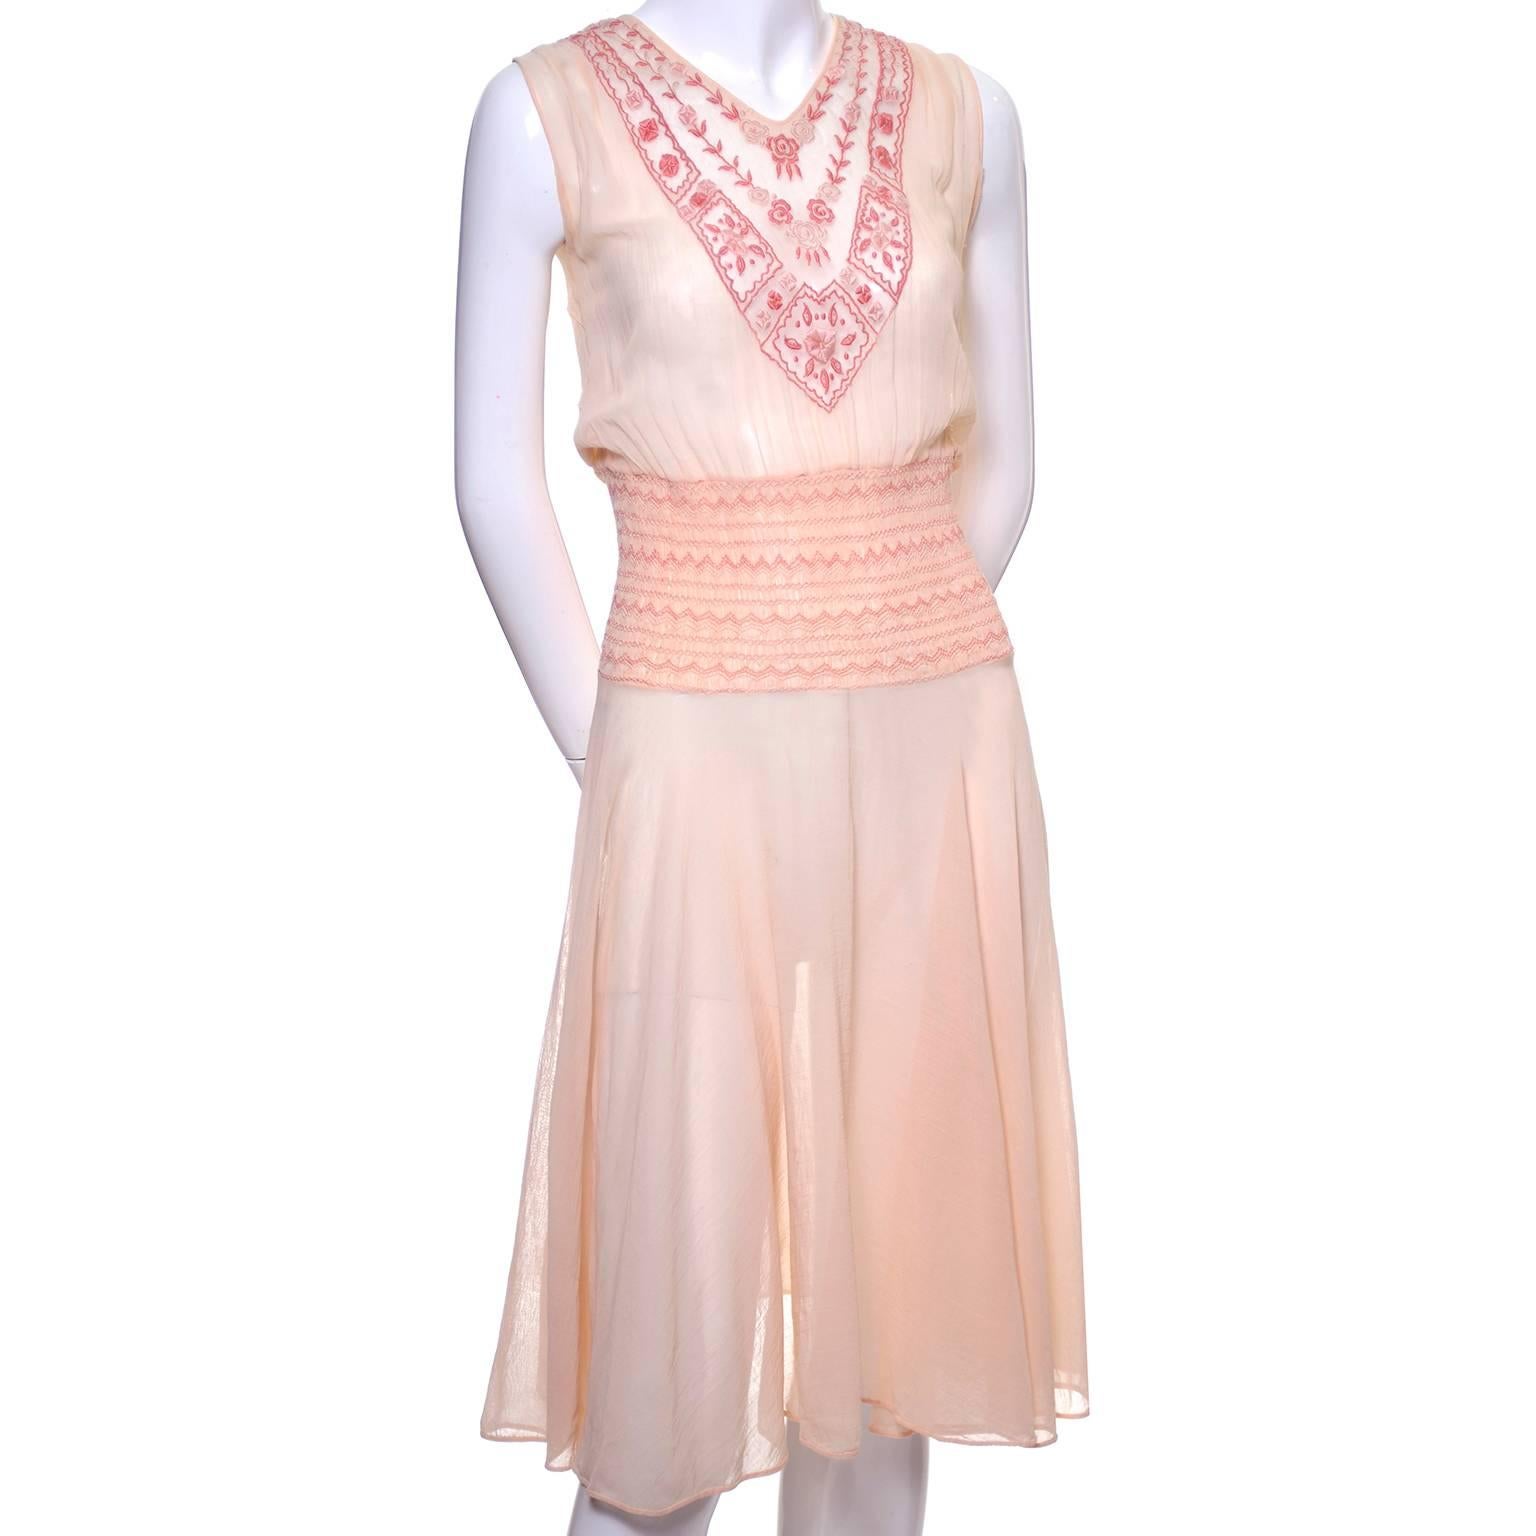 Women's Bohemian 1920s Vintage Dress Cotton Voile Smock Pleating Embroidery